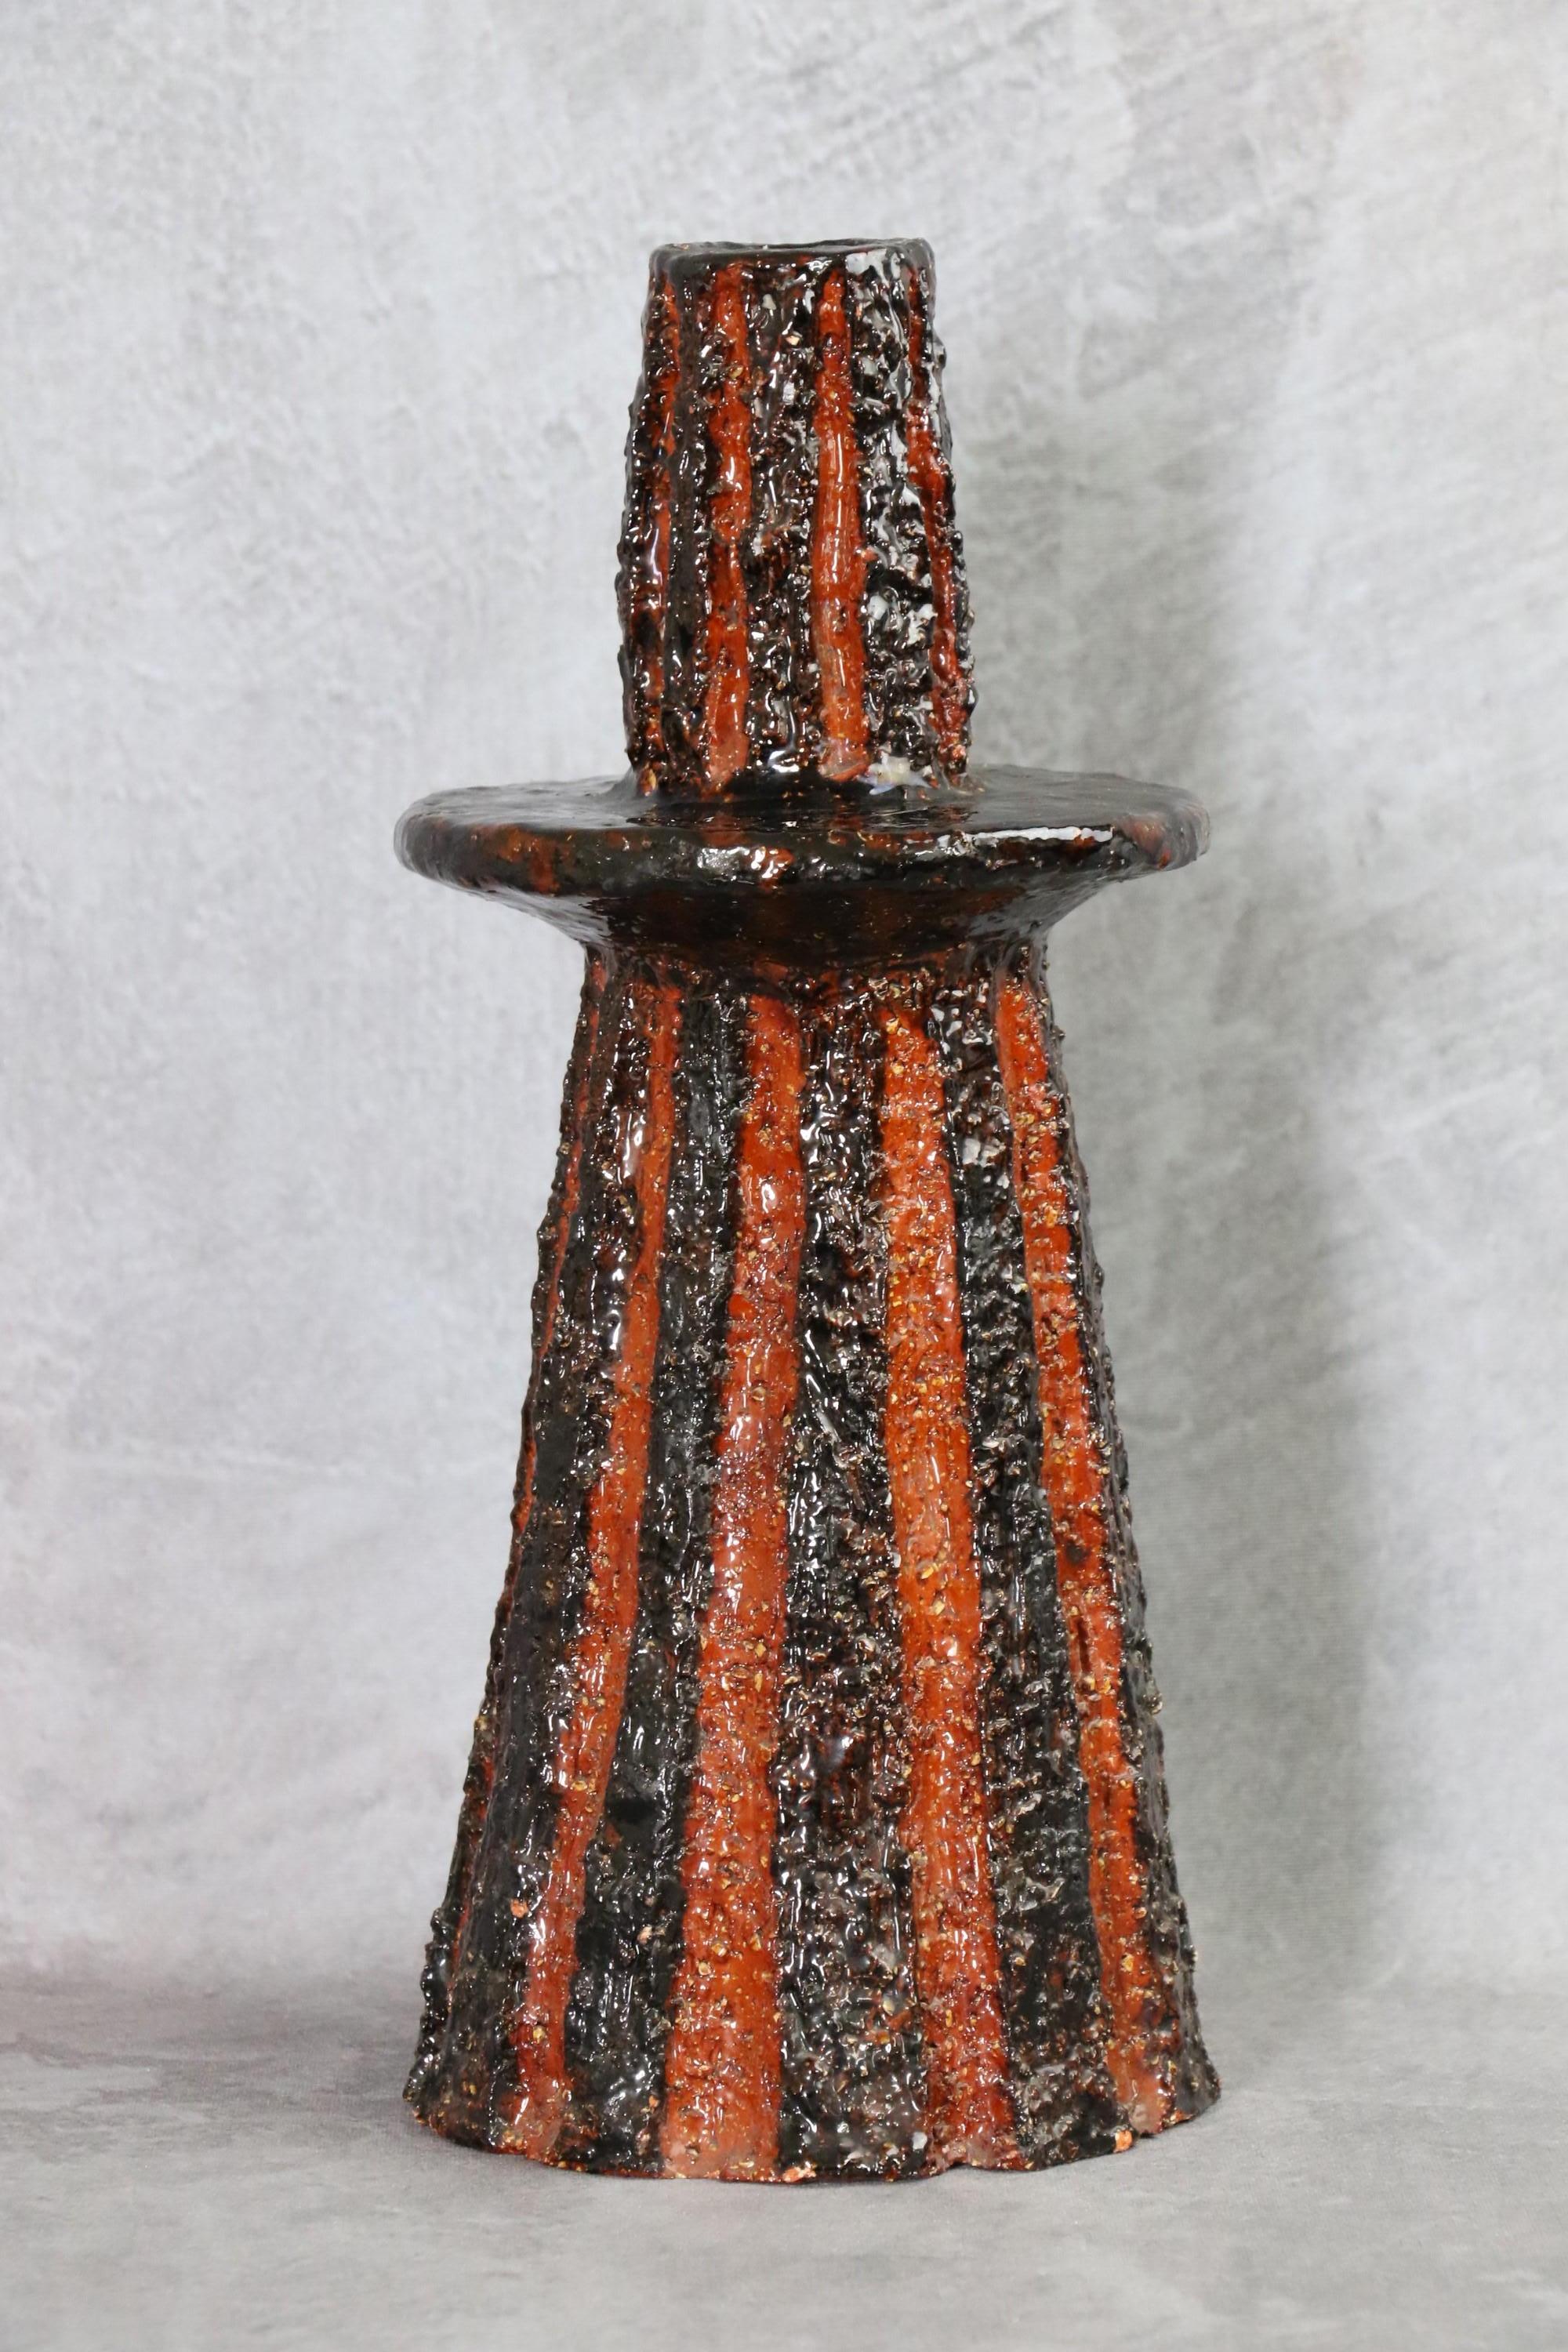 Large Brutalist ceramic candlestick, Scandinavian design, Mid-century, 1960's

Large Brutalist candlestick in glazed stoneware in red-brown and black. The work on the glaze, its scarification, gives it a primitive and brutalist aspect. Its size